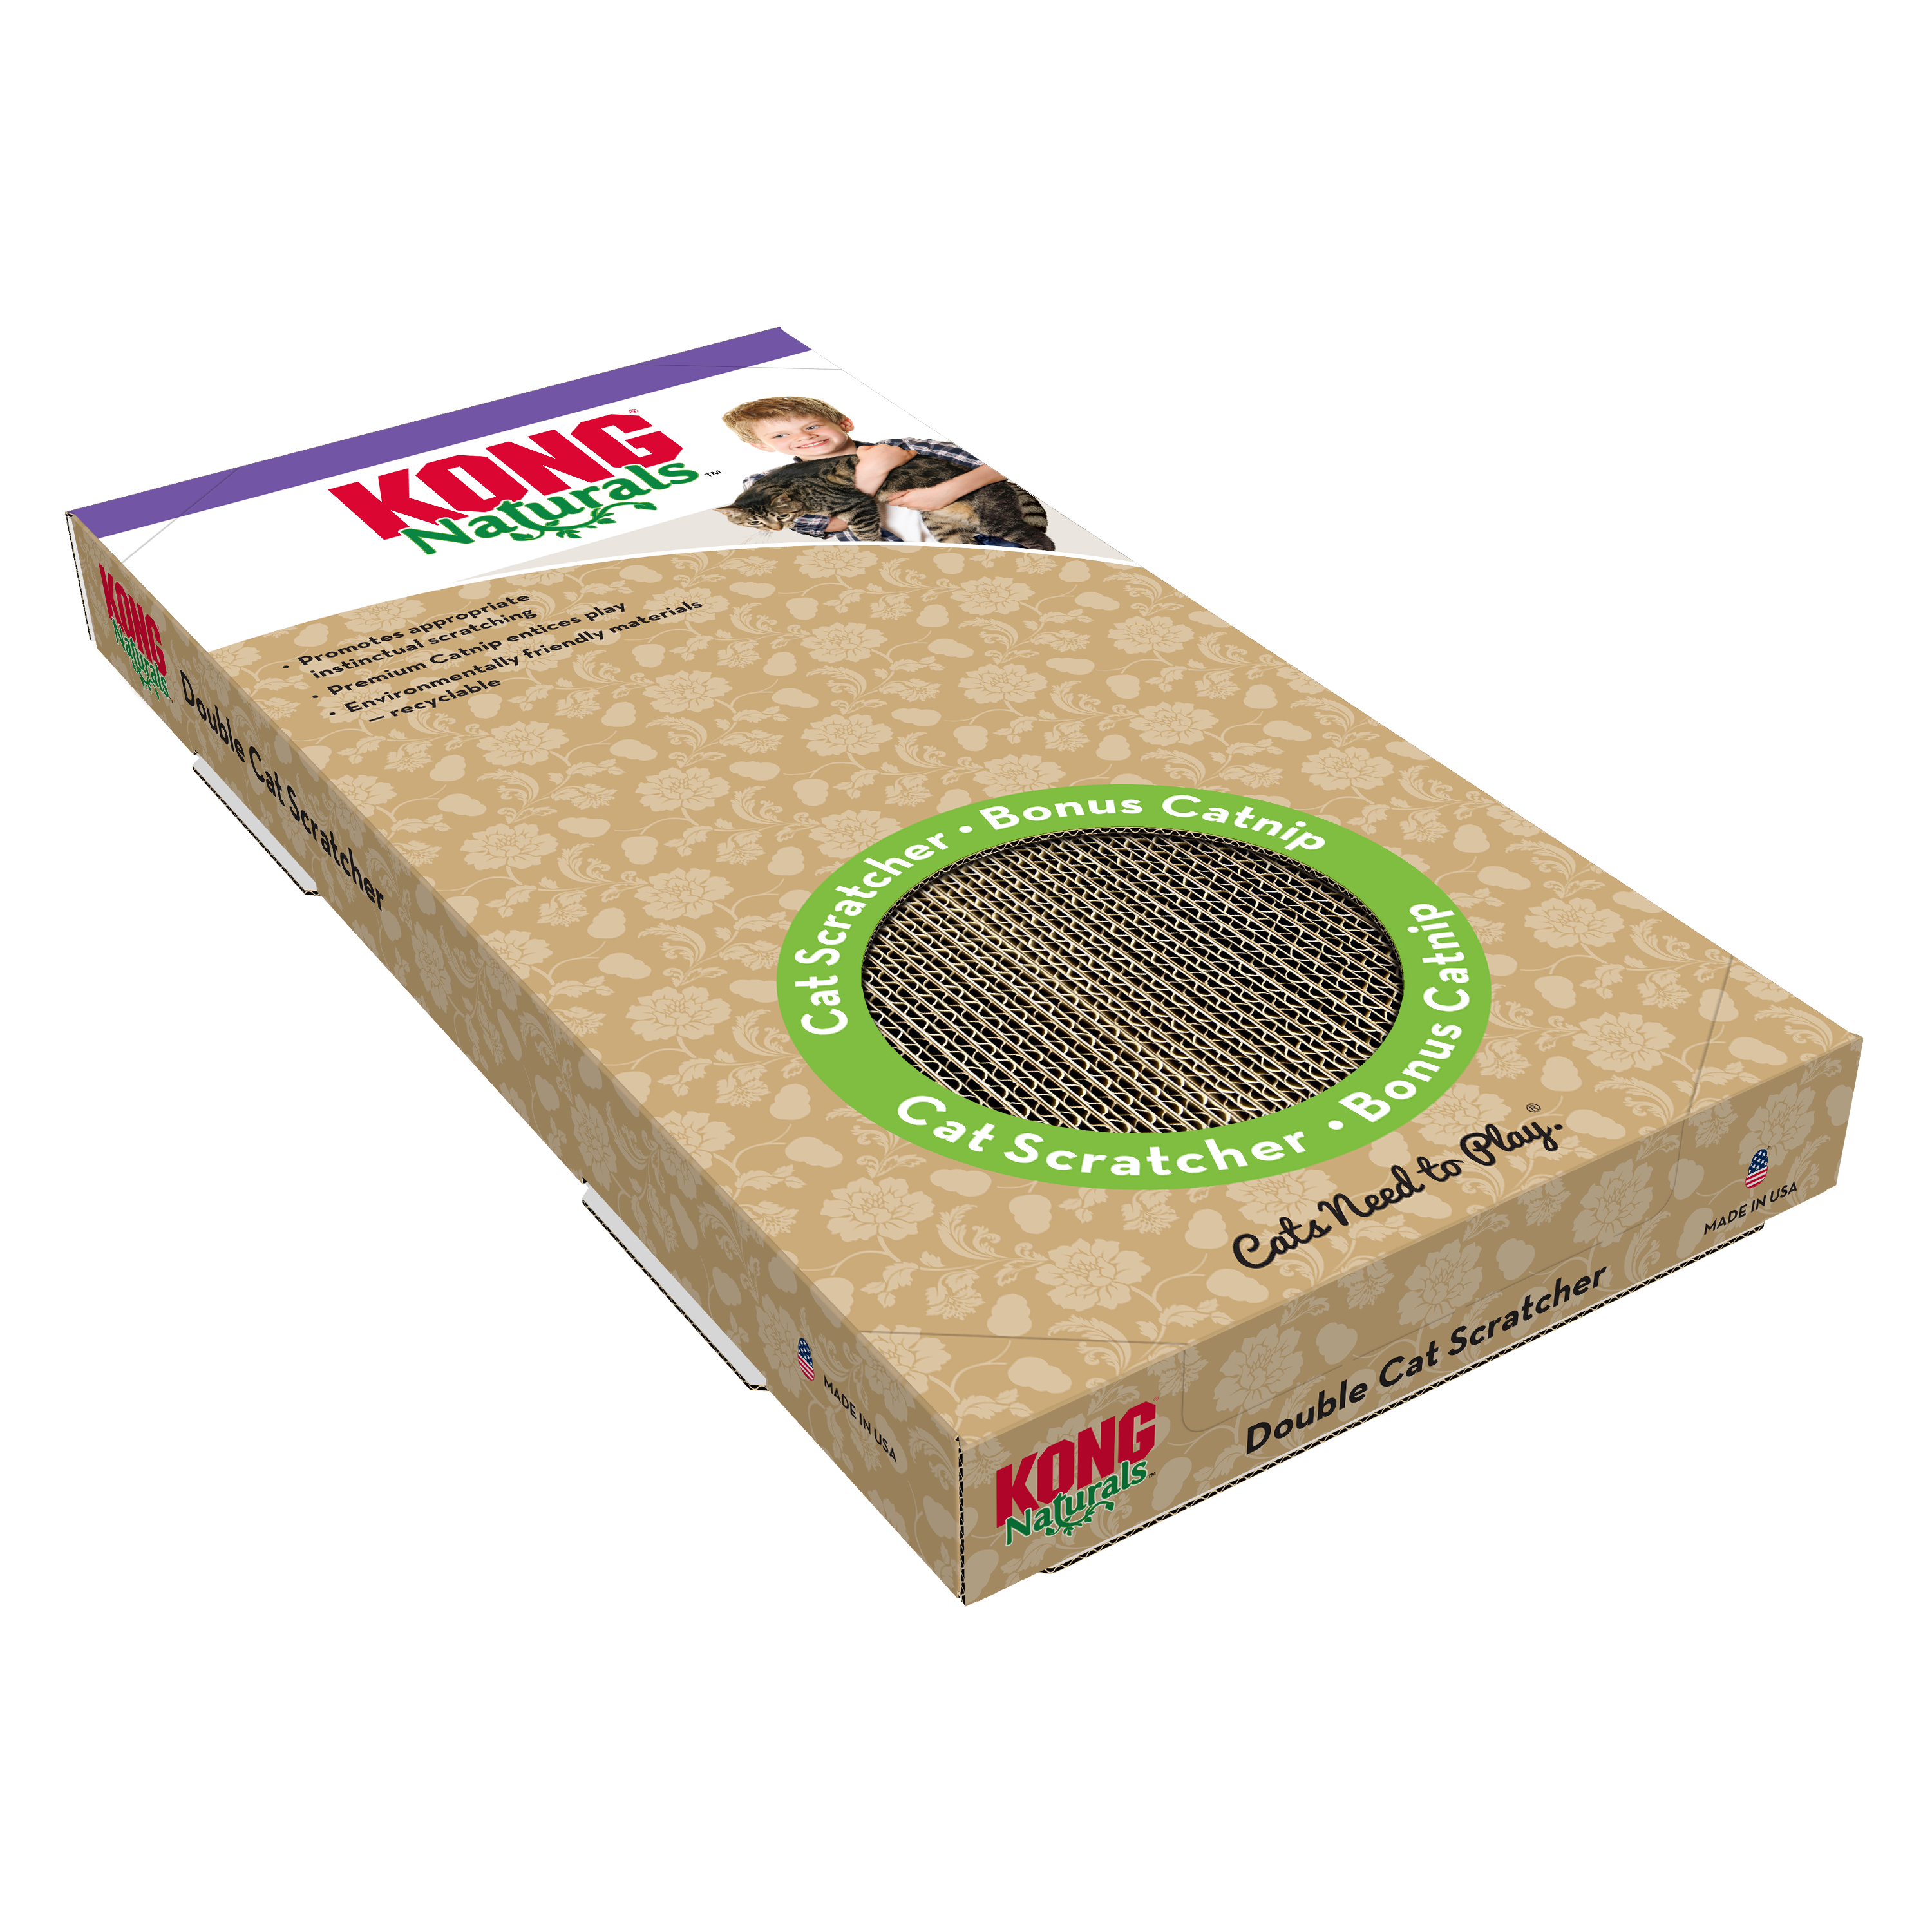 Naturals Scratcher Double offpack product image